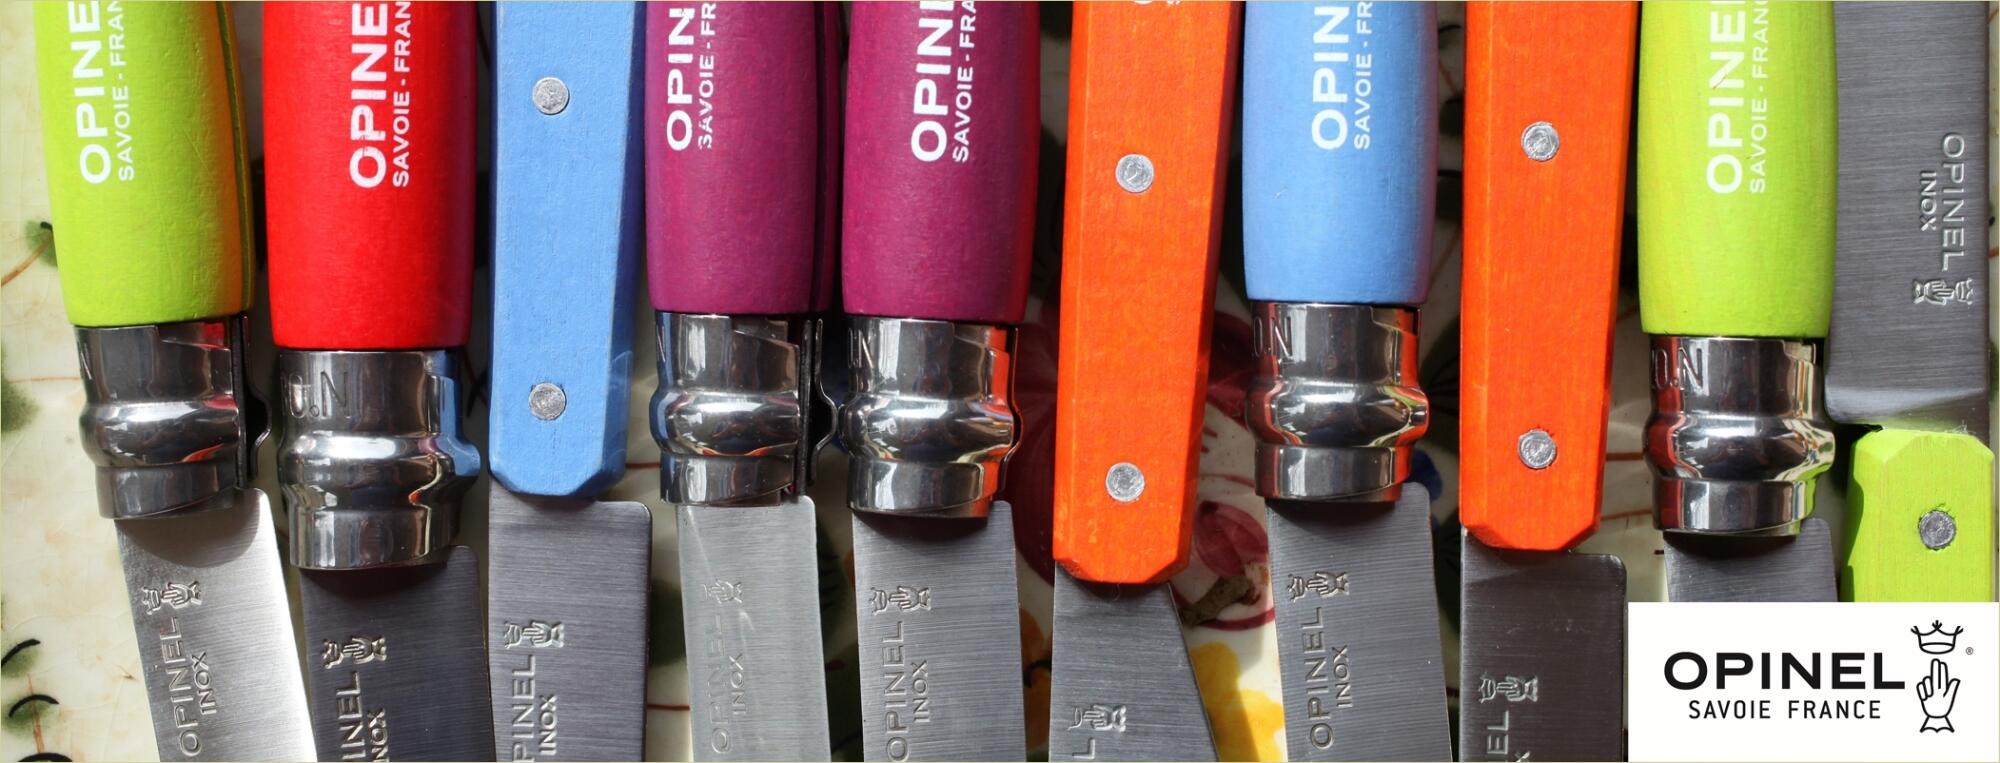 Opinel Messersets